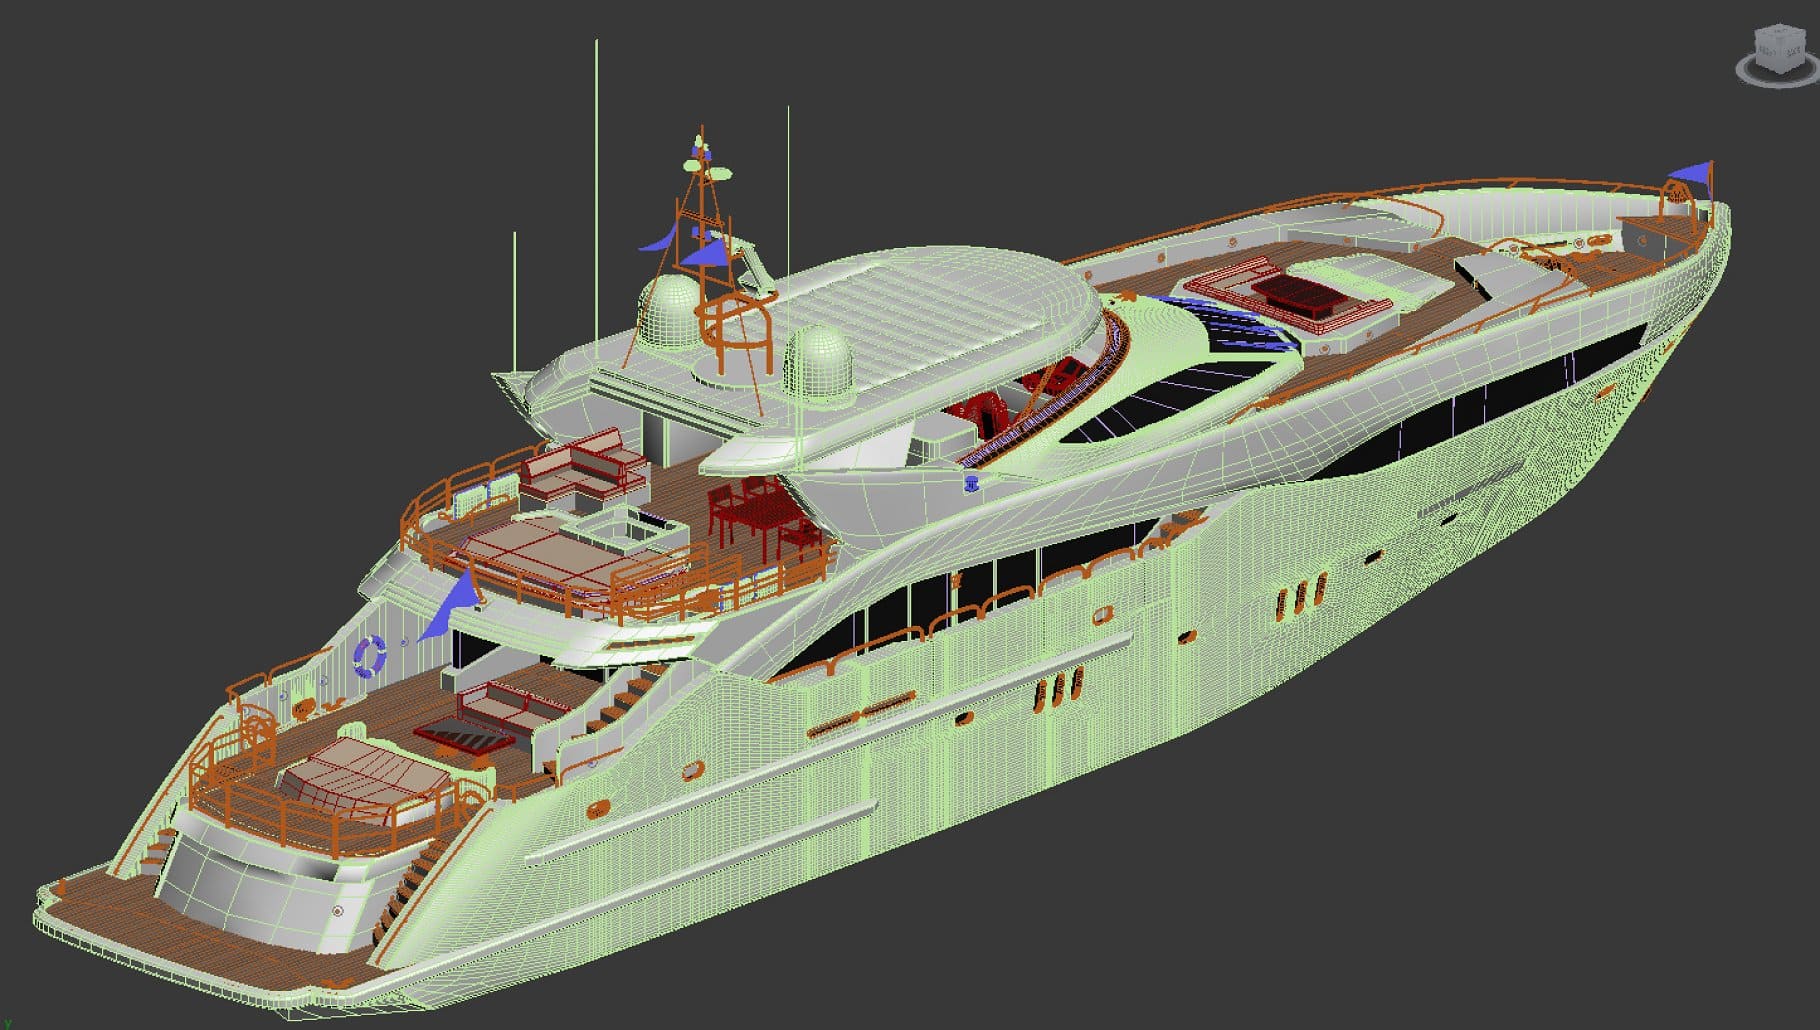 Sunseeker predator 130 Superyacht model with green lines in the graphic editor.